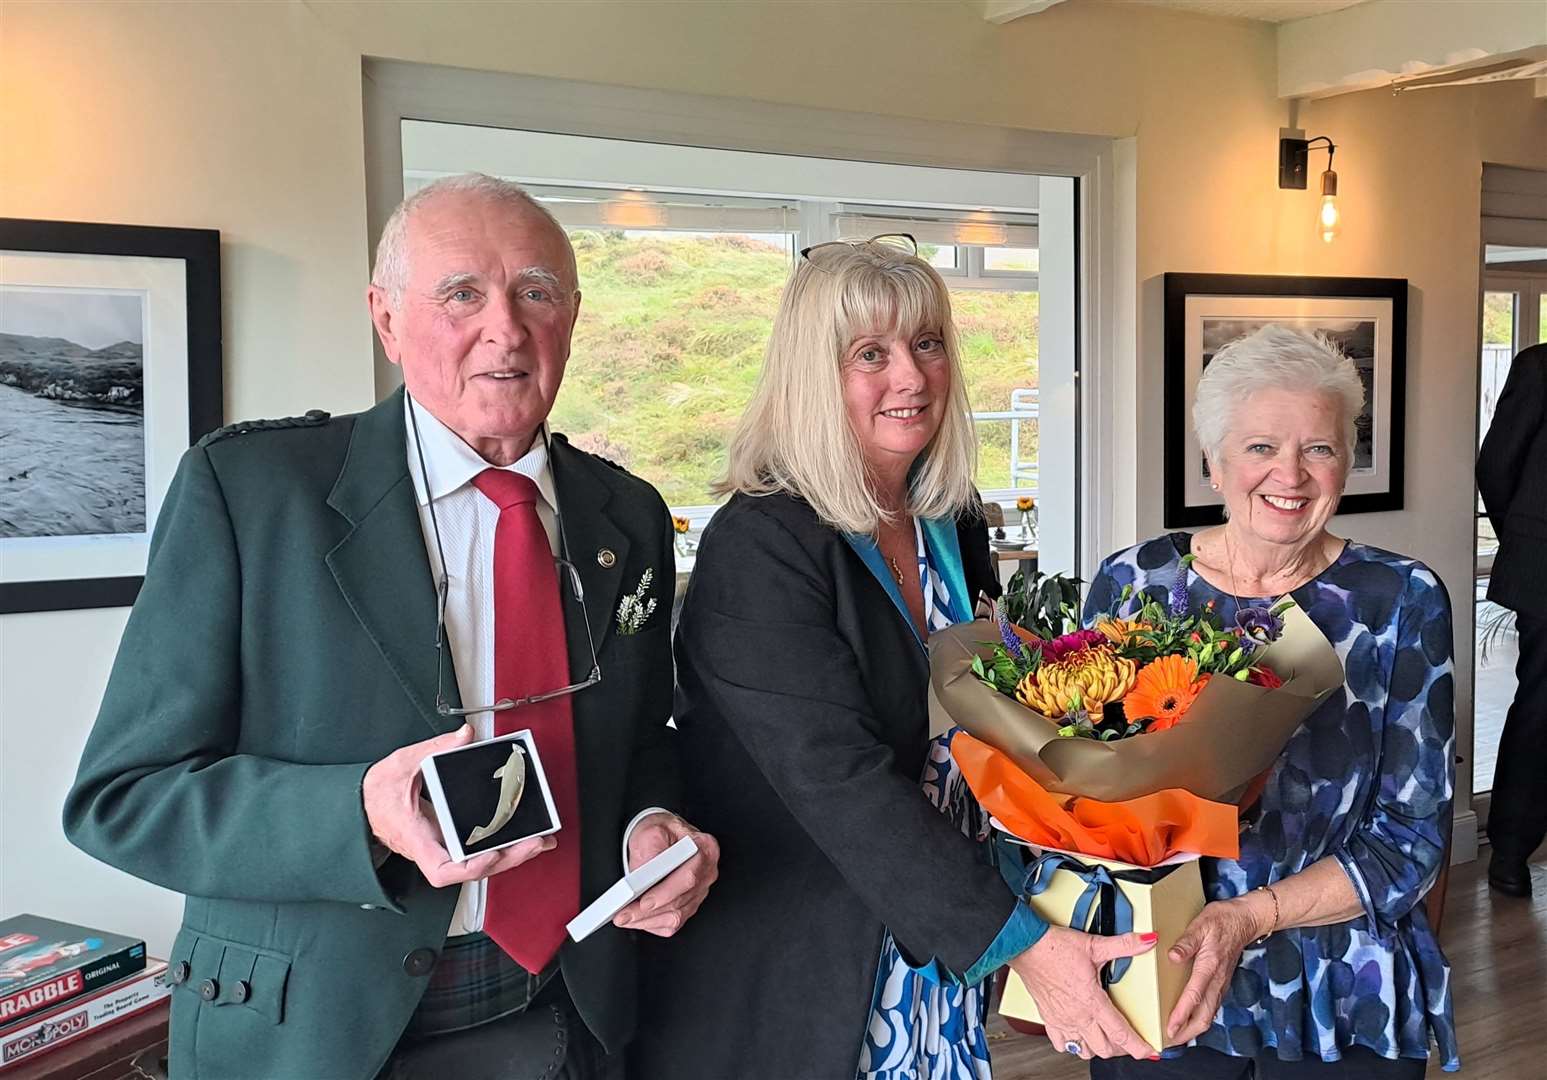 David Grant shows off the specially commissioned silver kilt pin he received on standing down as a deputy lord lieutenant while Vice Lord-Lieutenant Kim Tulloch presents his wife Norah with a bouquet of flowers.